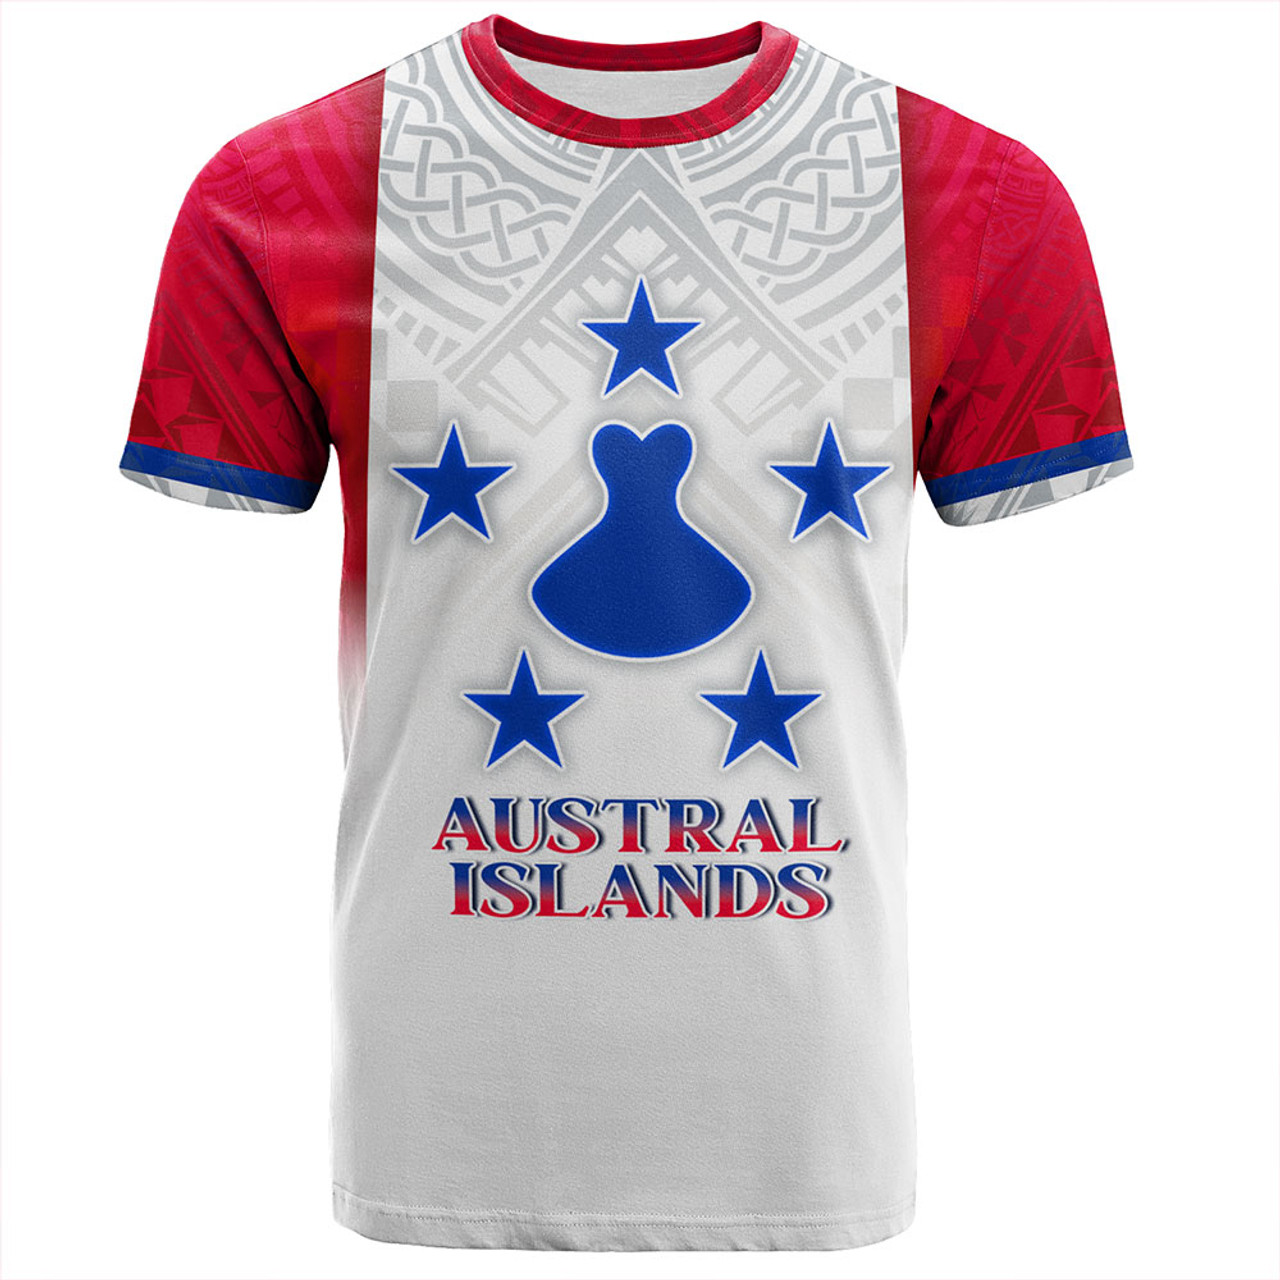 Austral Islands T-Shirt Flag Color With Traditional Patterns